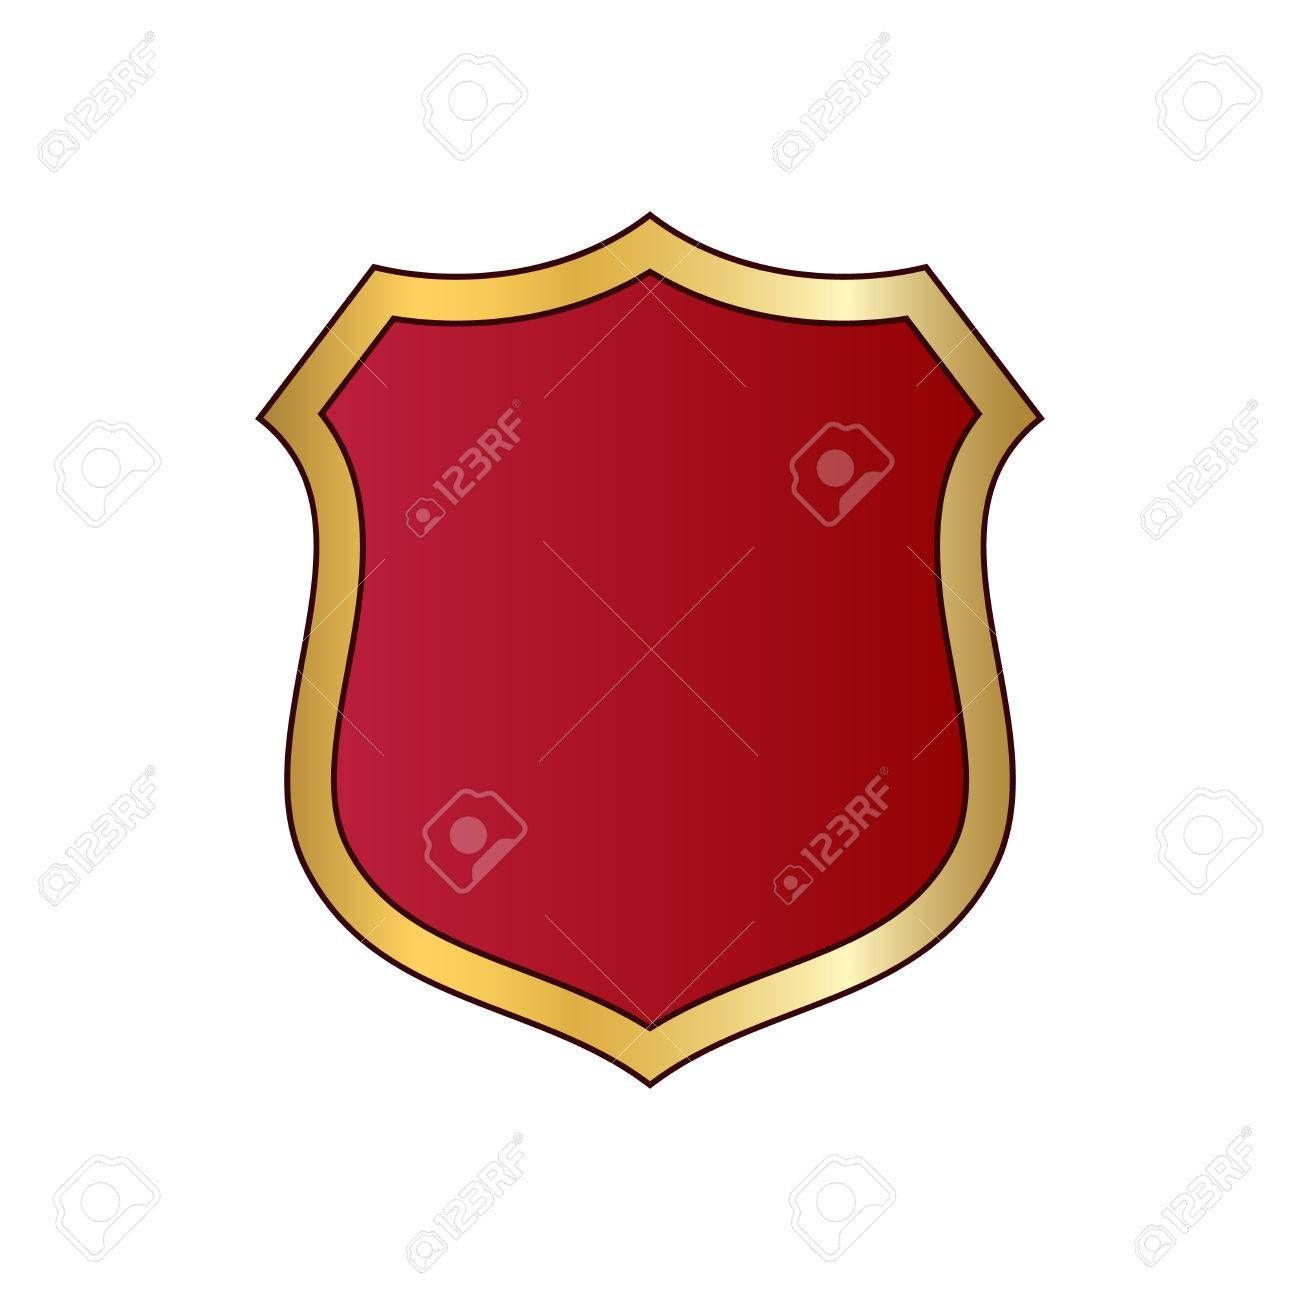 Red Security Shield Logo - Security Shield Clipart badge shape - Free Clipart on ...